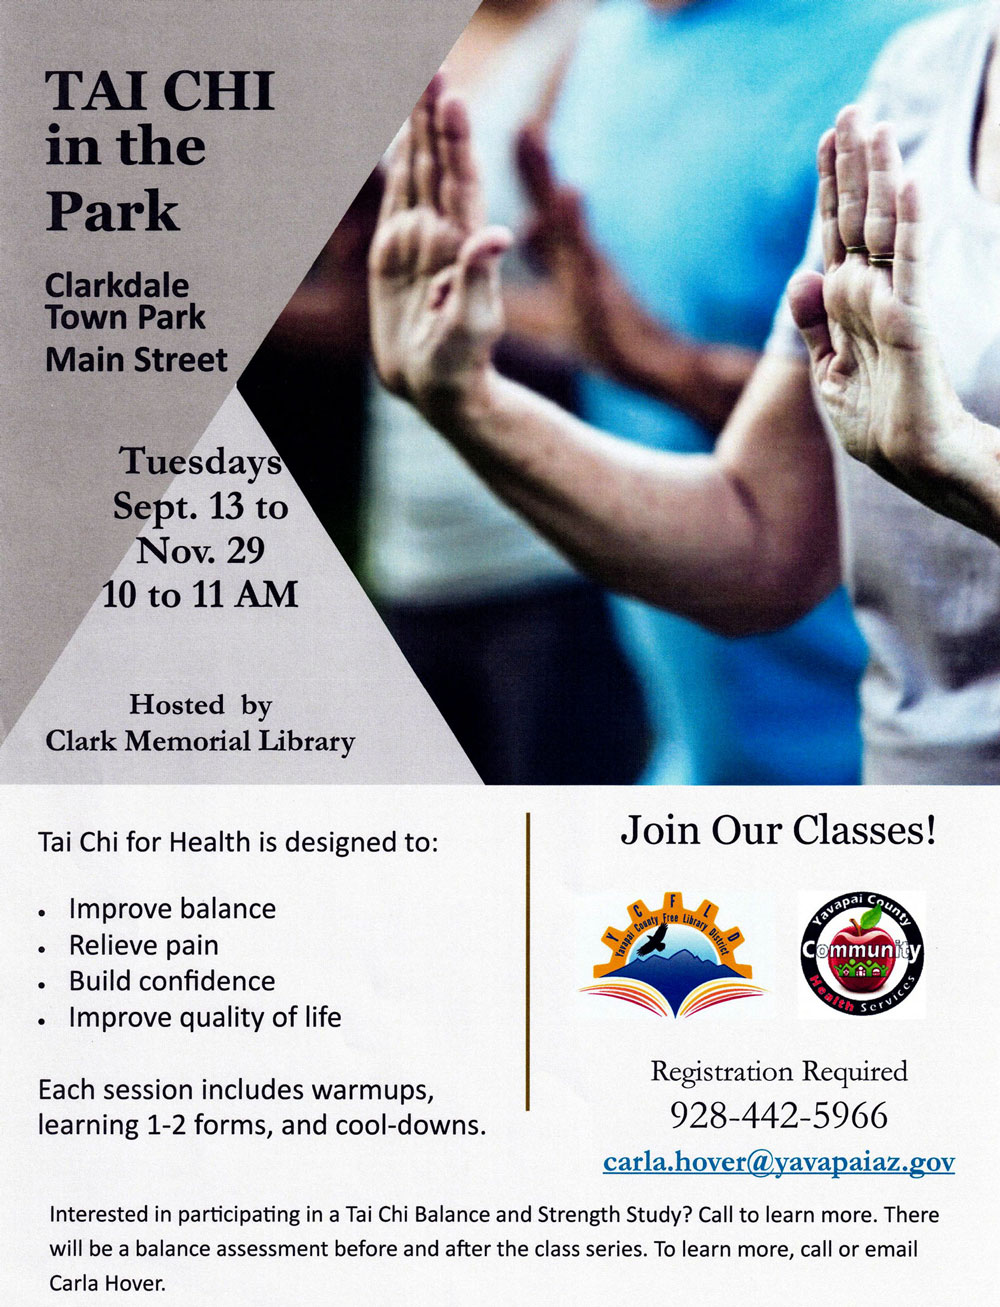 Tai Chi in the Park hosted by Clark Memorial Library